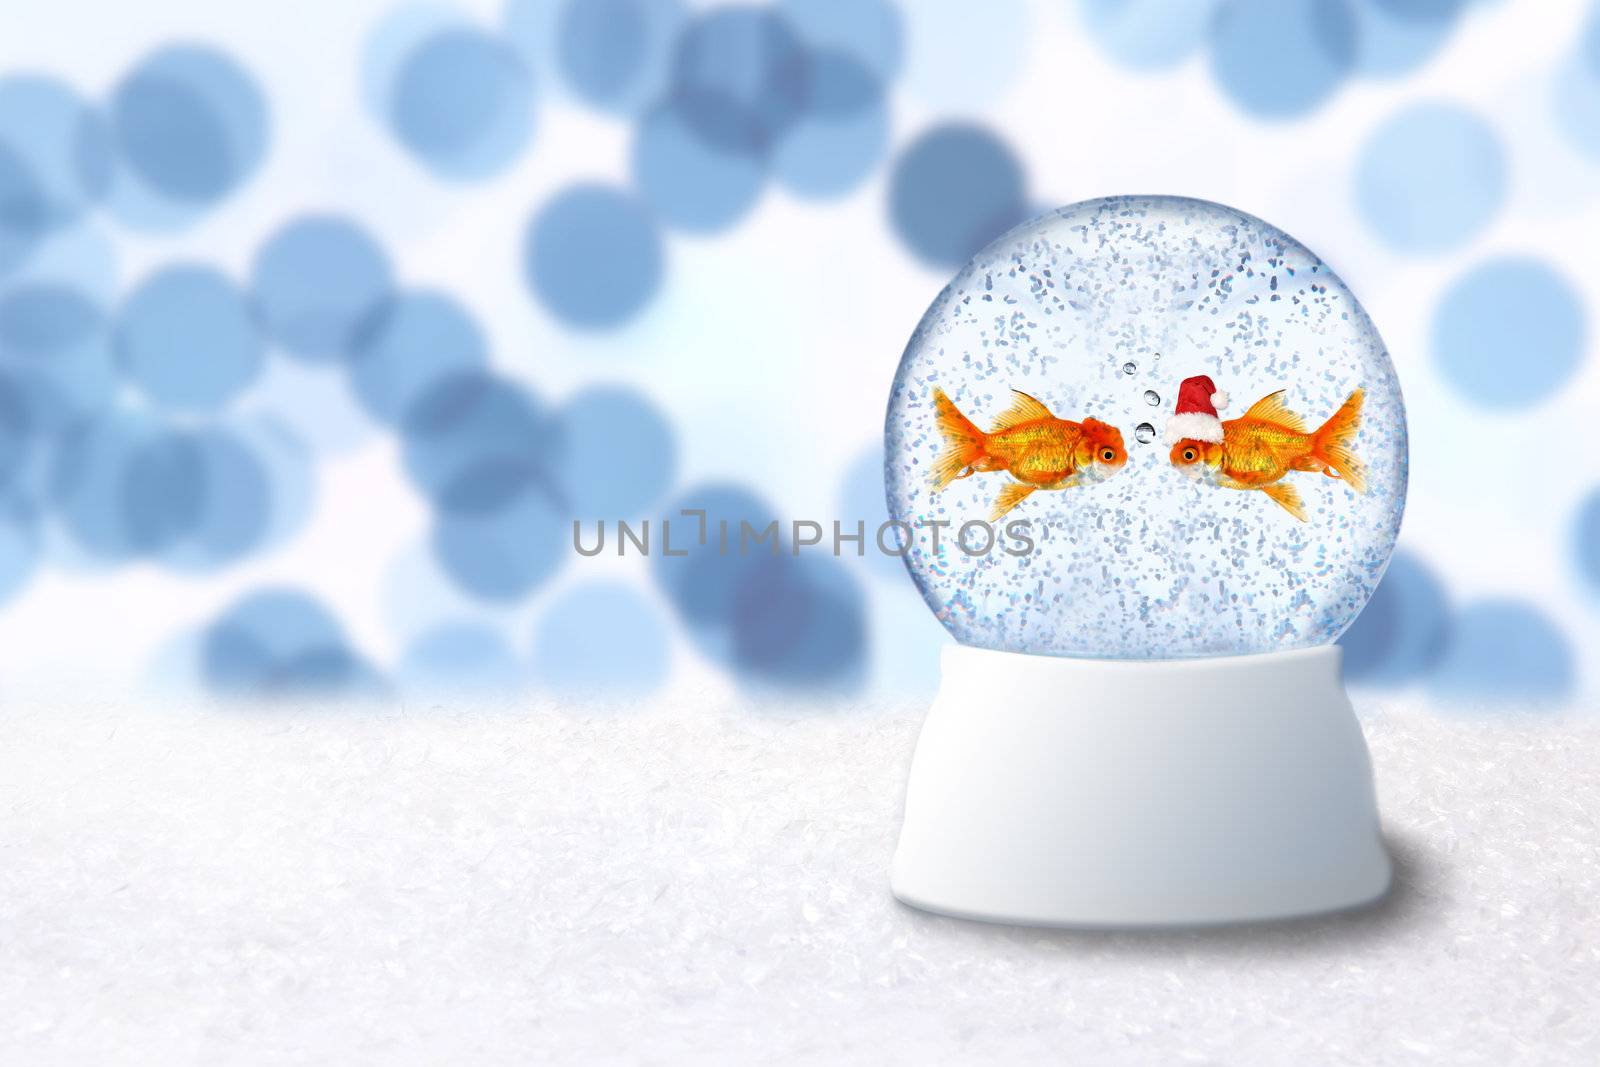 Christmas Snow Globe With Goldfish Santa Inside. Insert Your Own Image or Text